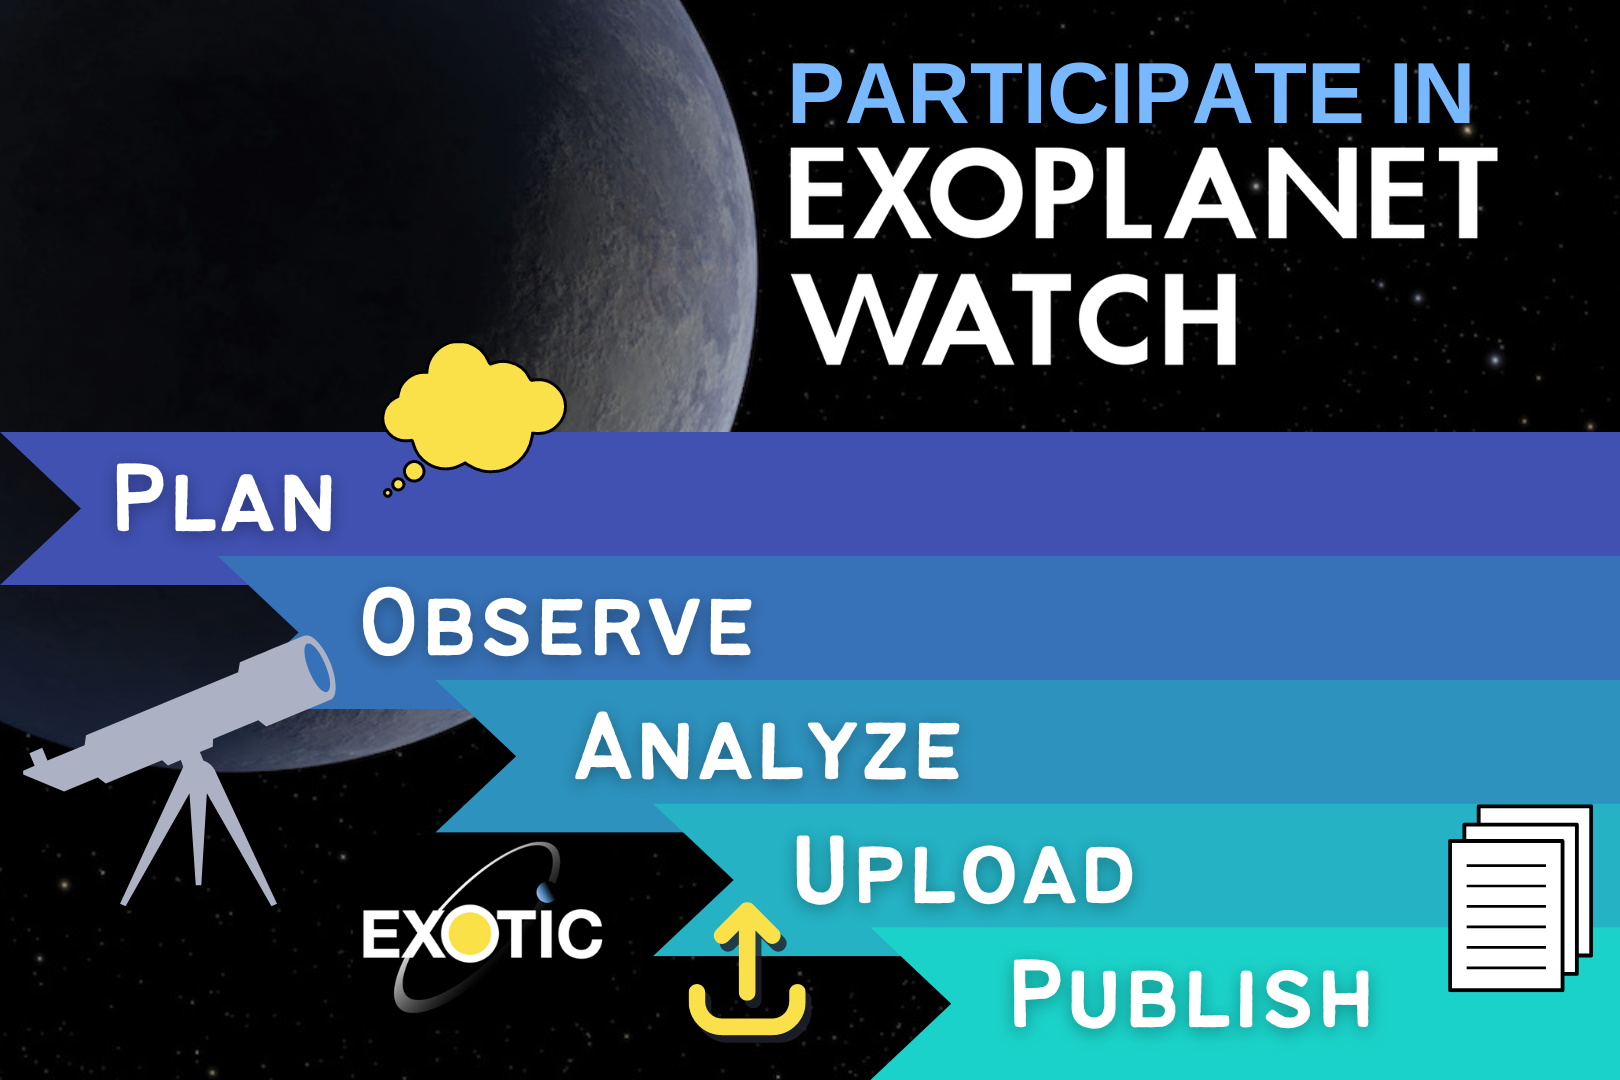 Participate in Exoplanet Watch